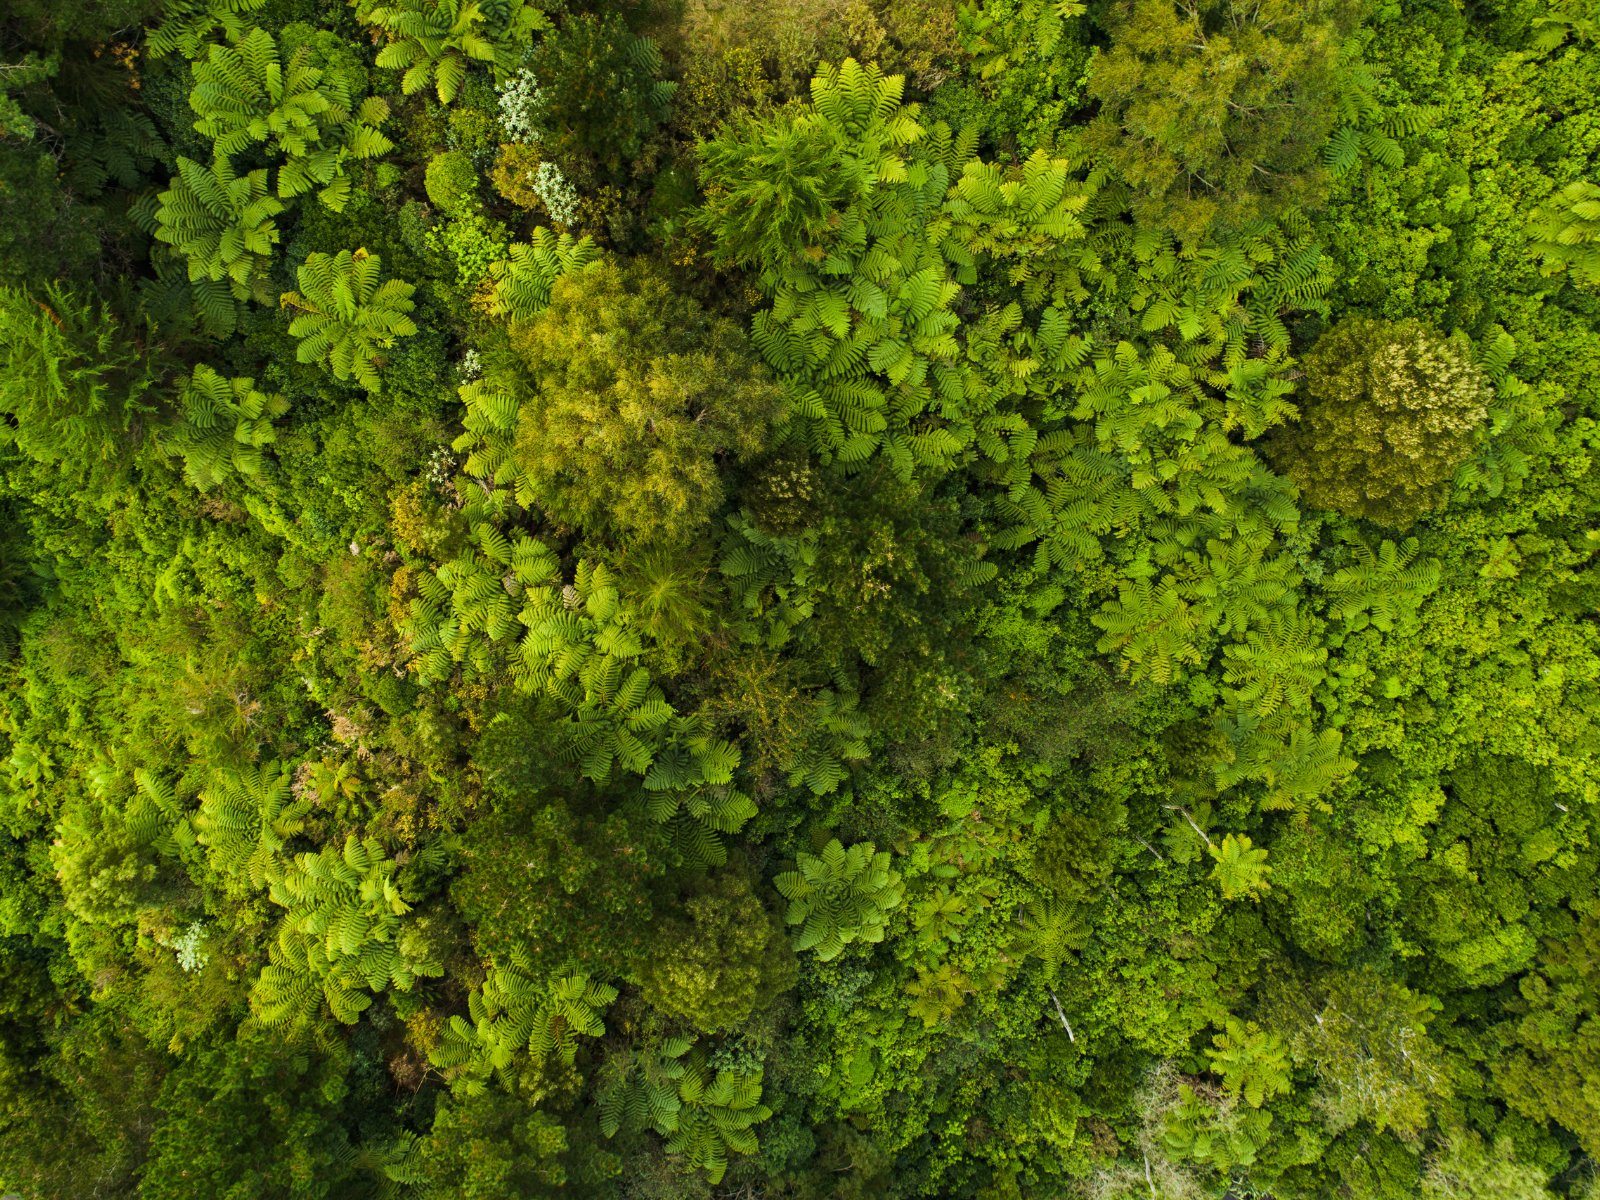 Image of greenery from above.